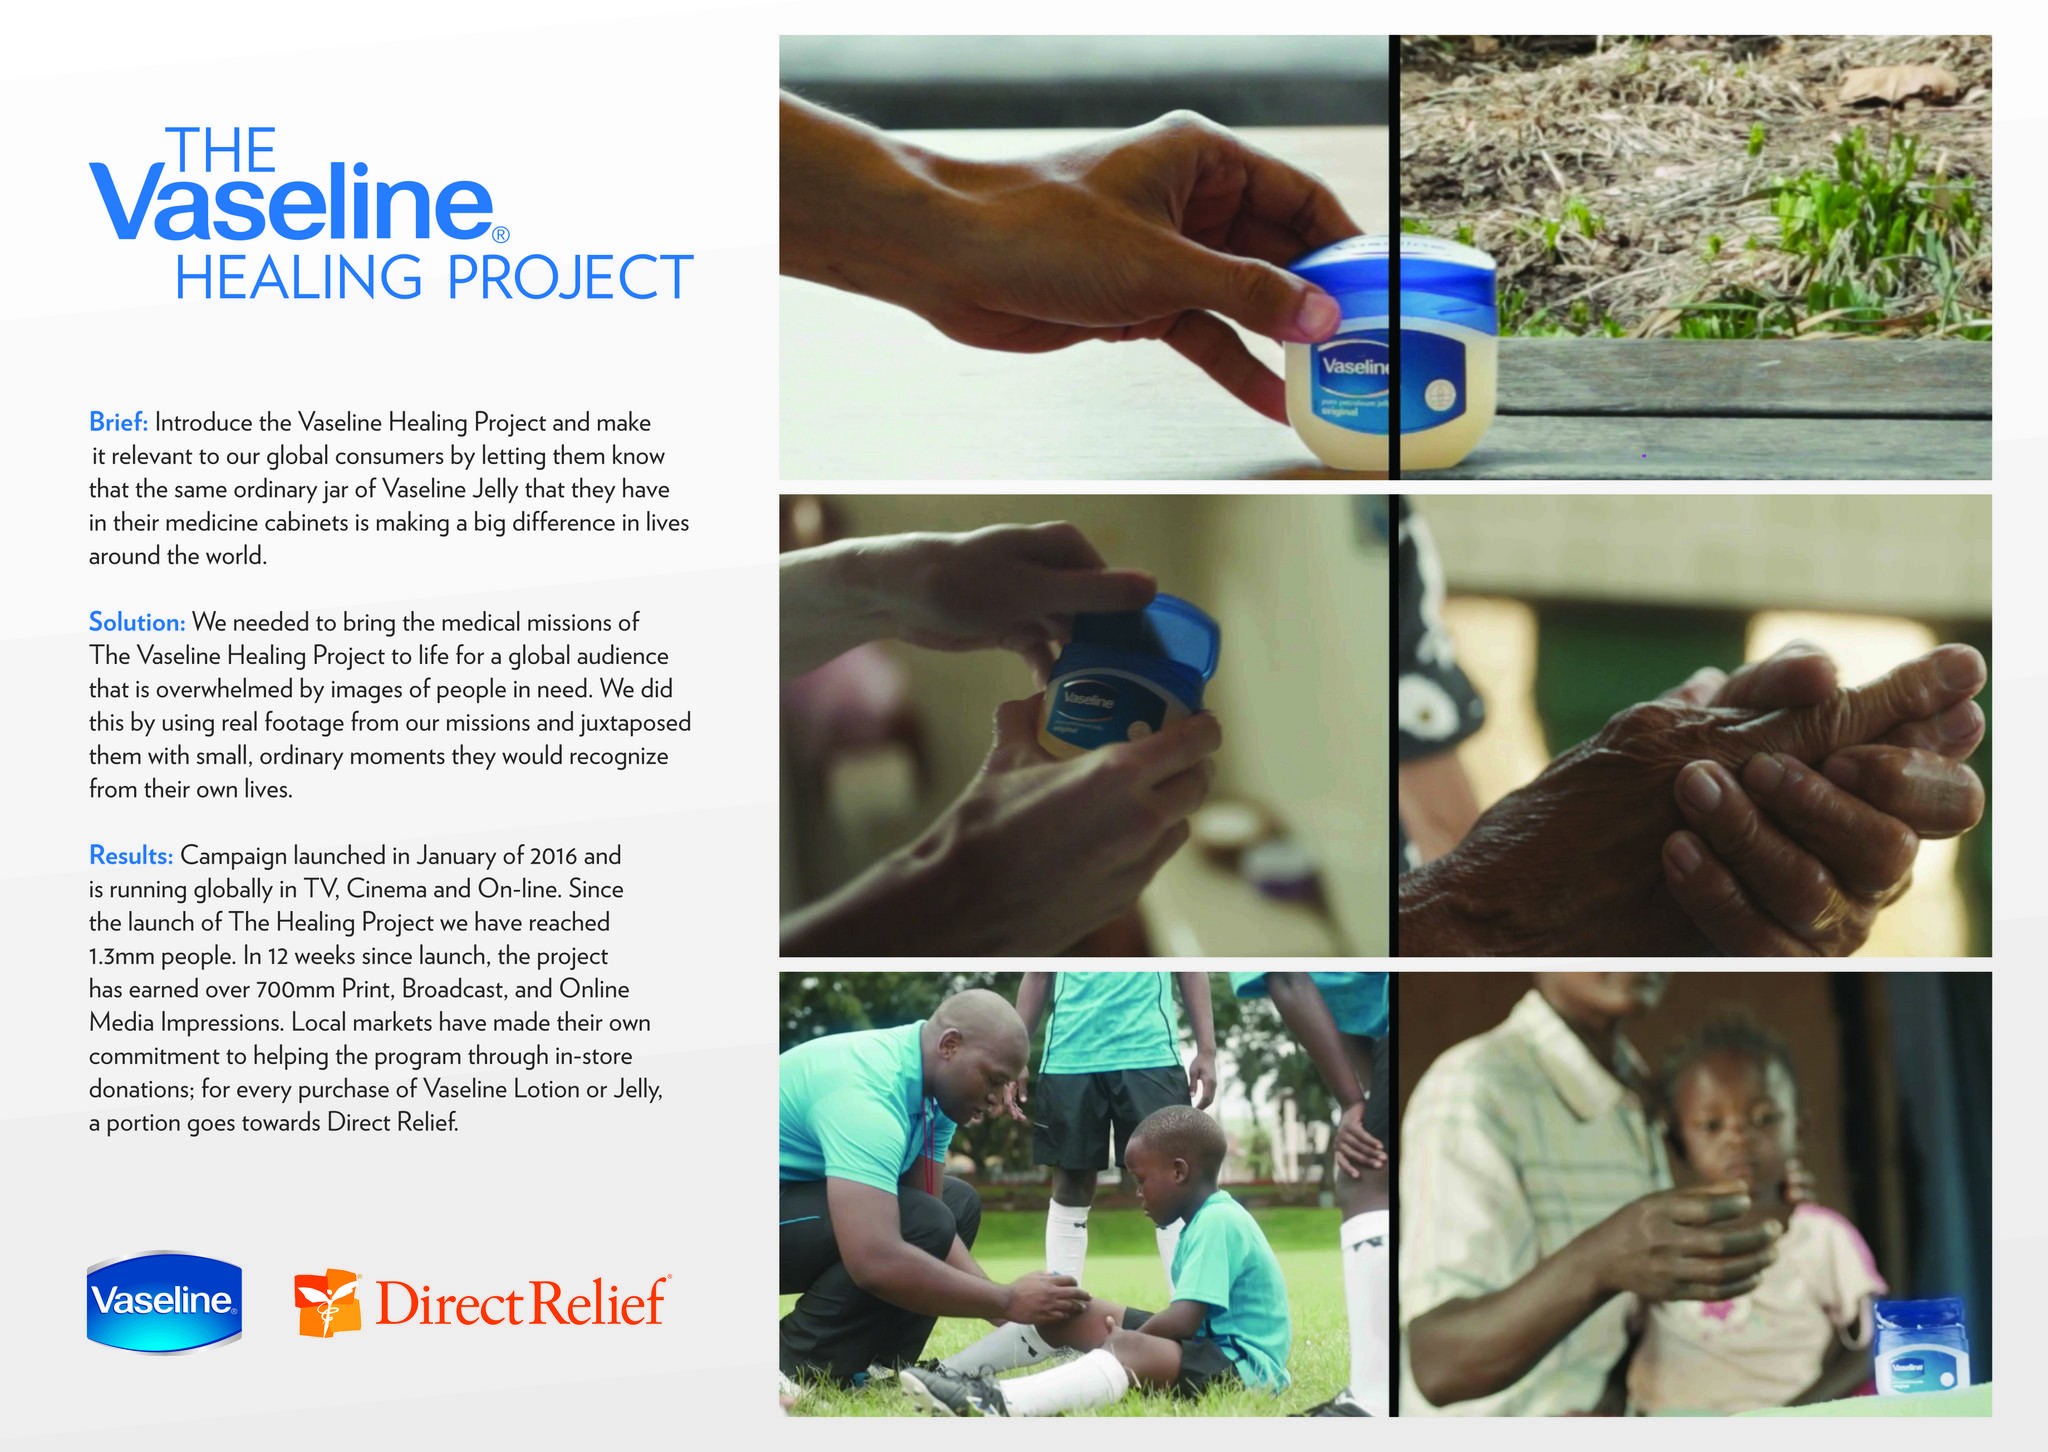 The Vaseline Healing Project